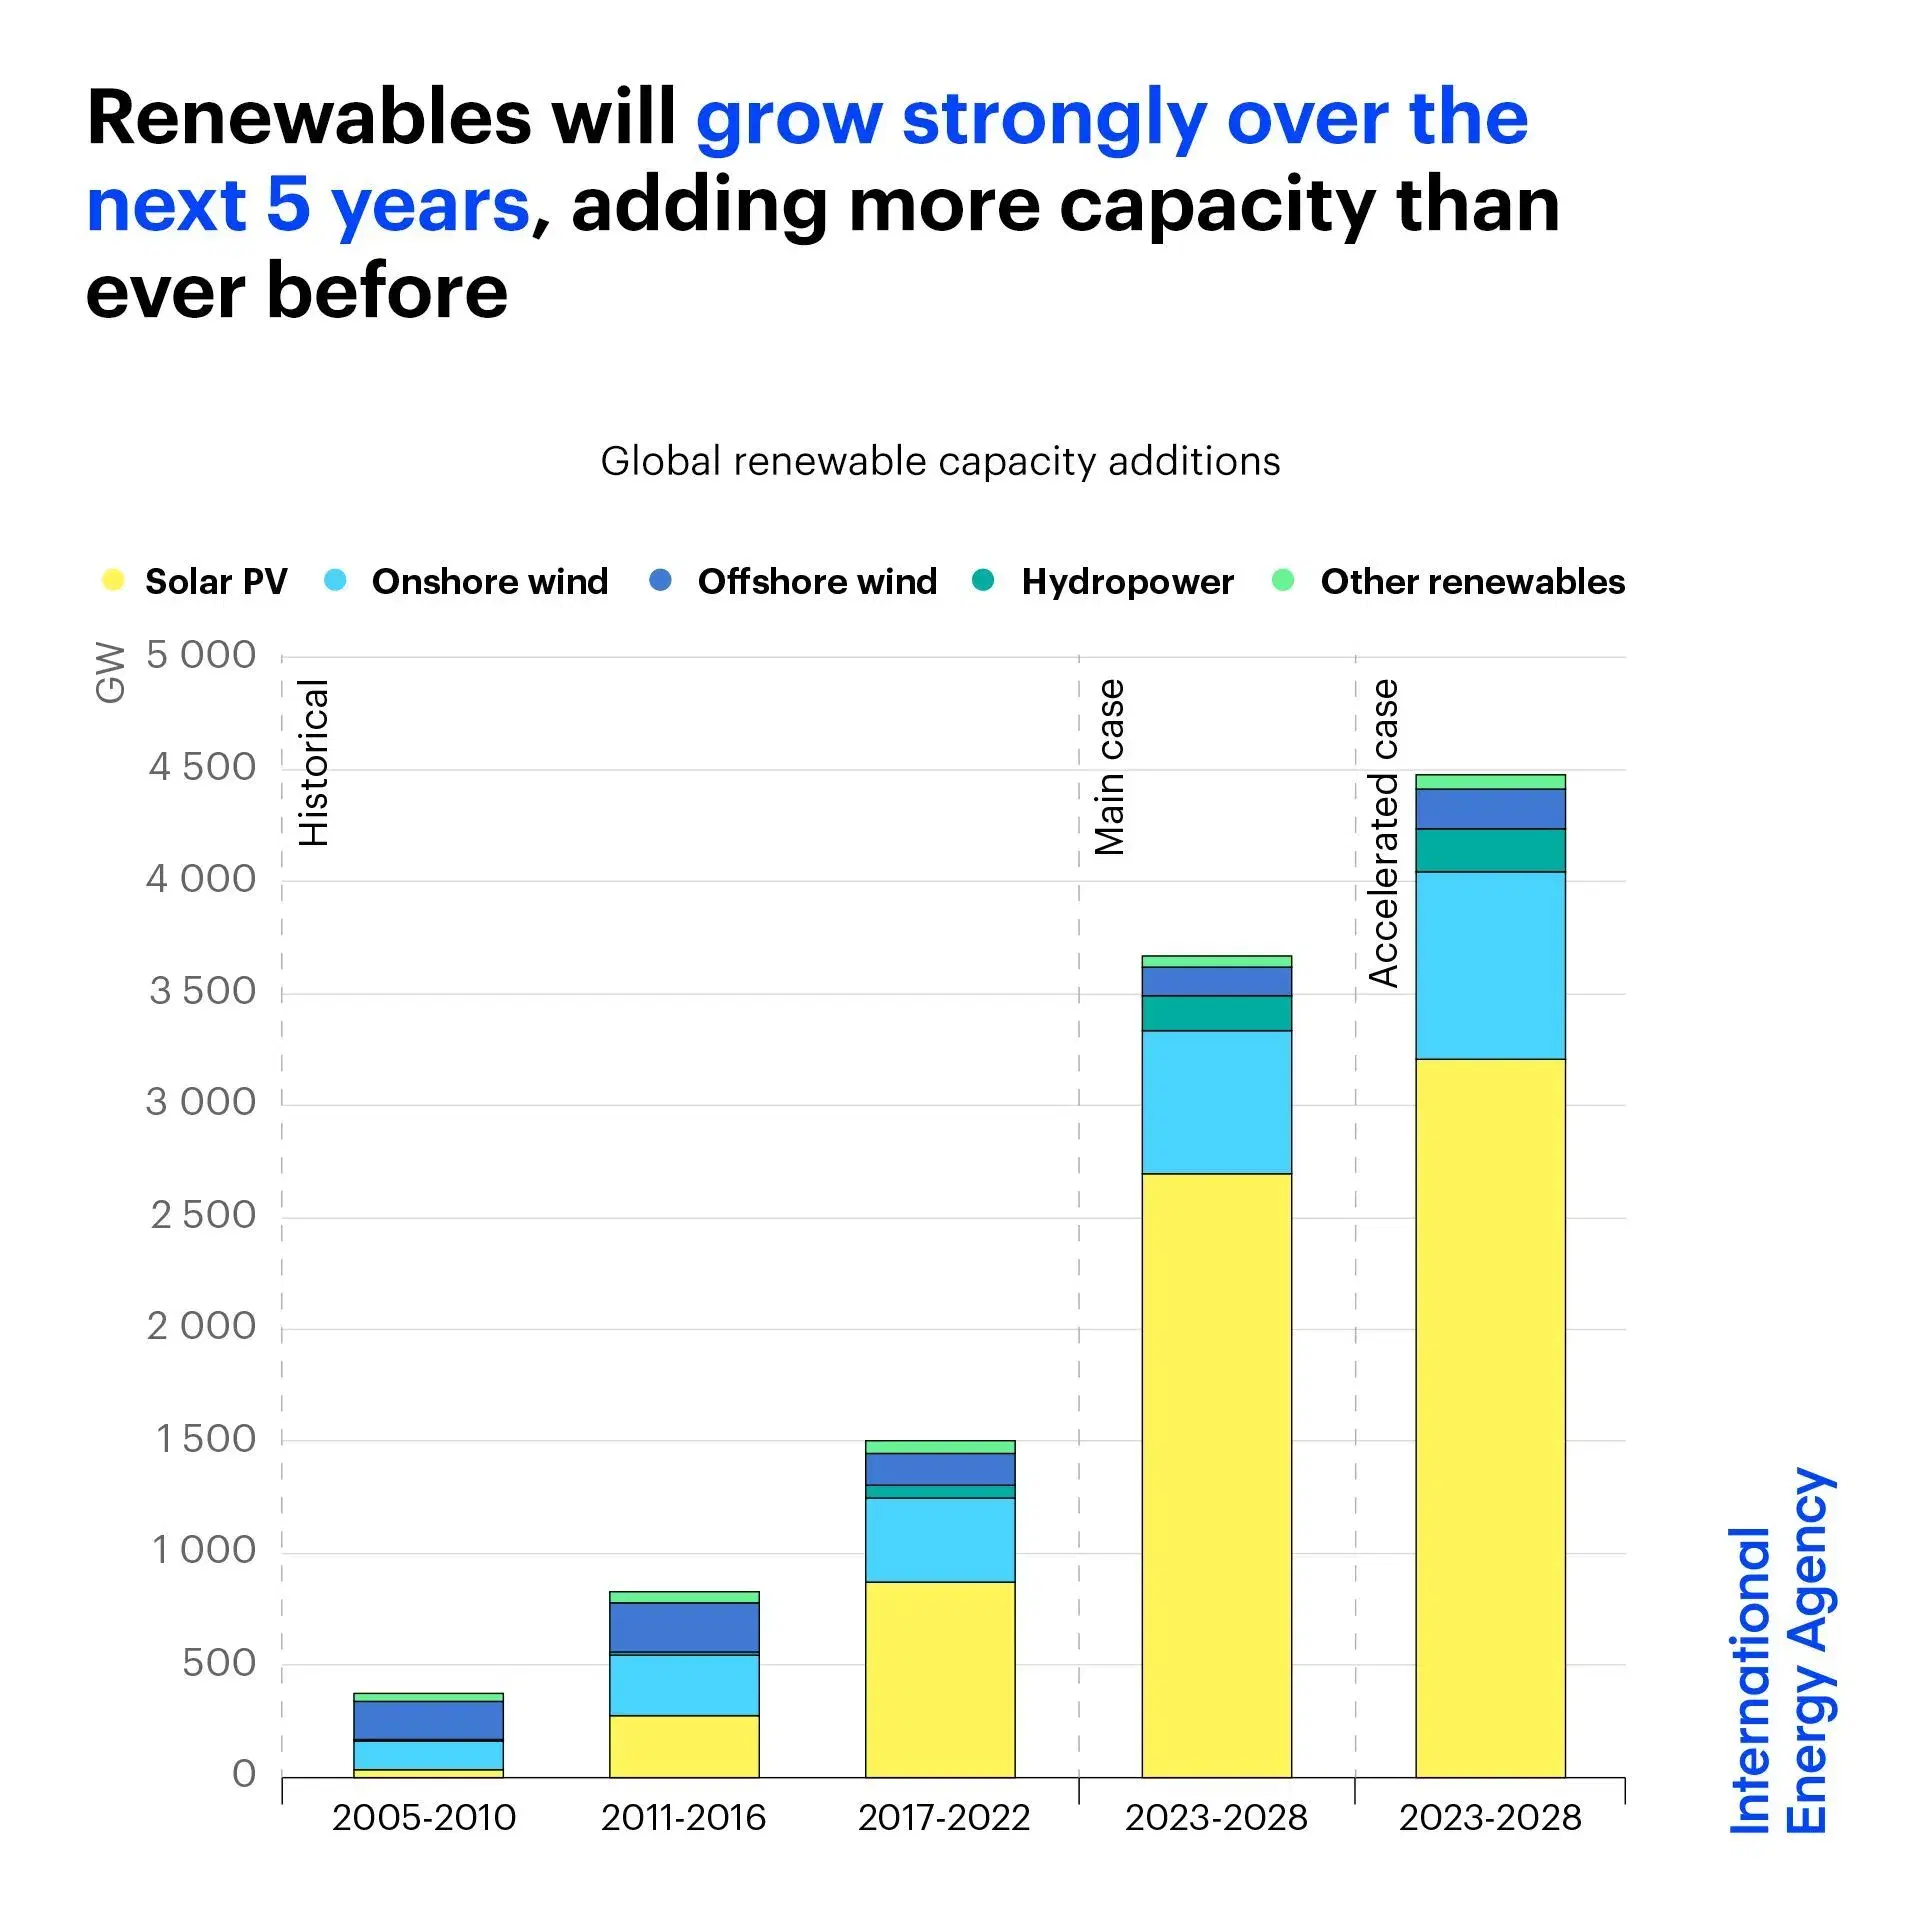 Renewables Expected to See Strong Growth Over the Next 5 Years